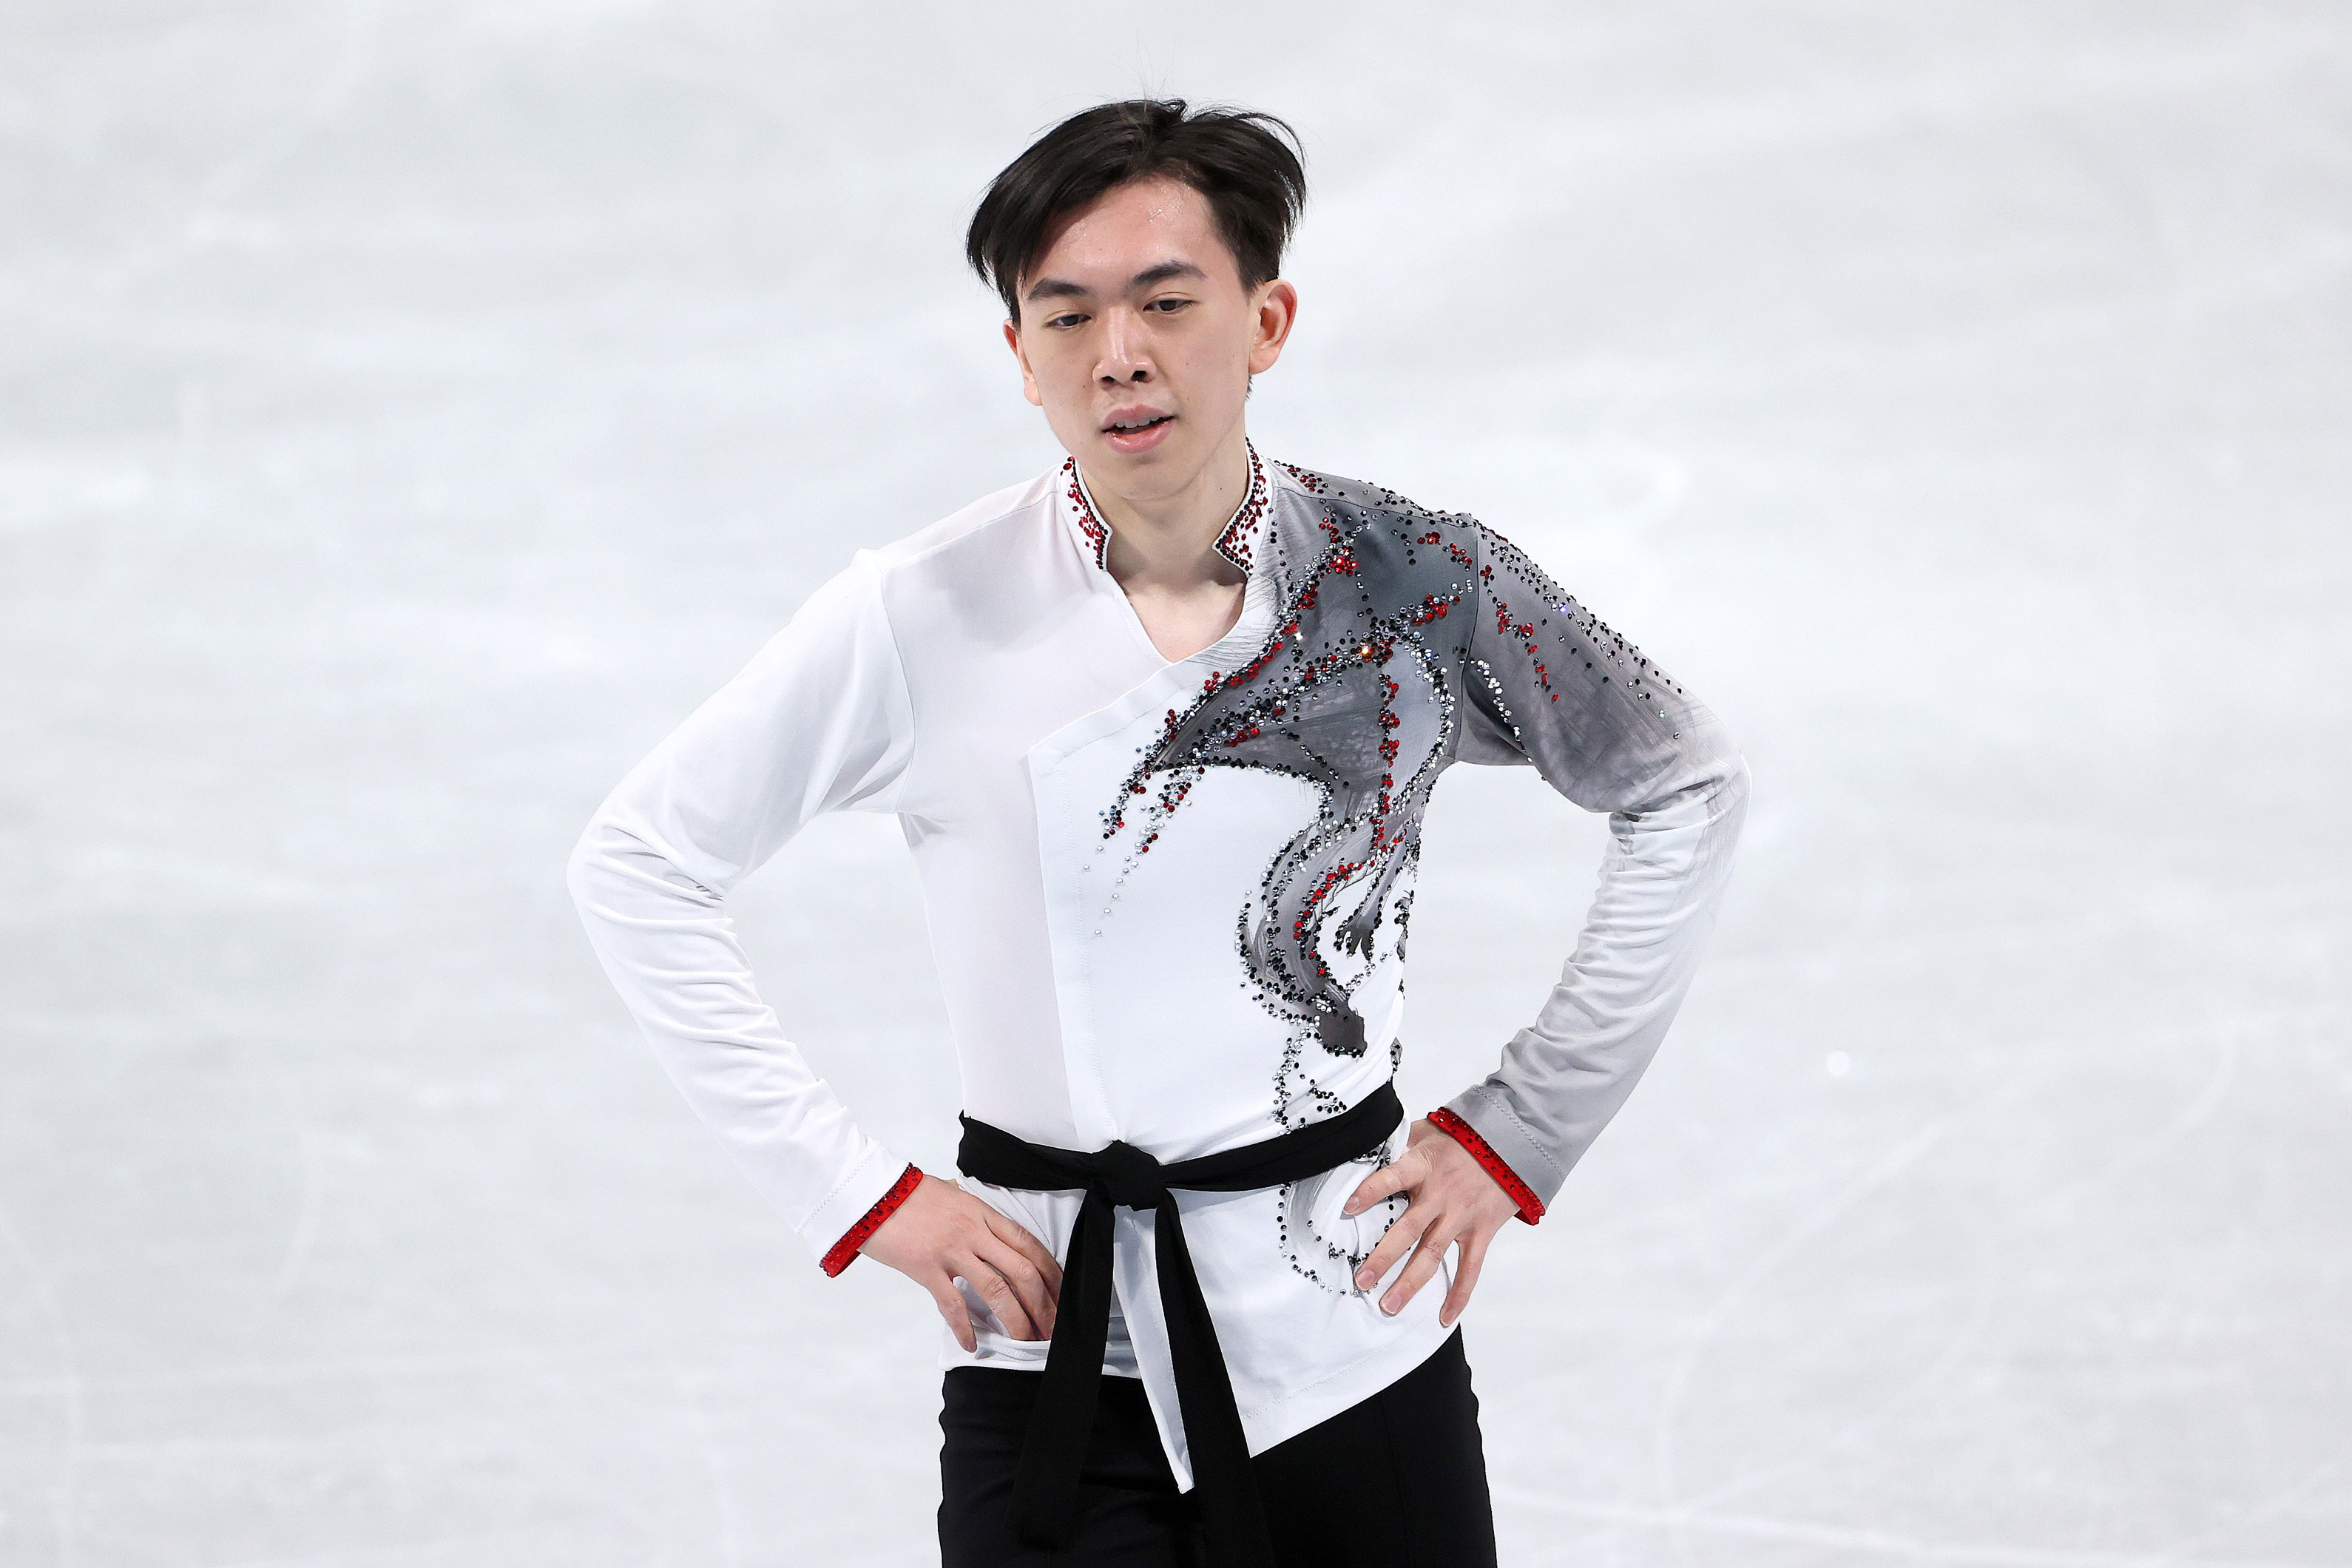 Vincent Zhou of Team USA on the ice during the men's team free skate on Sunday.